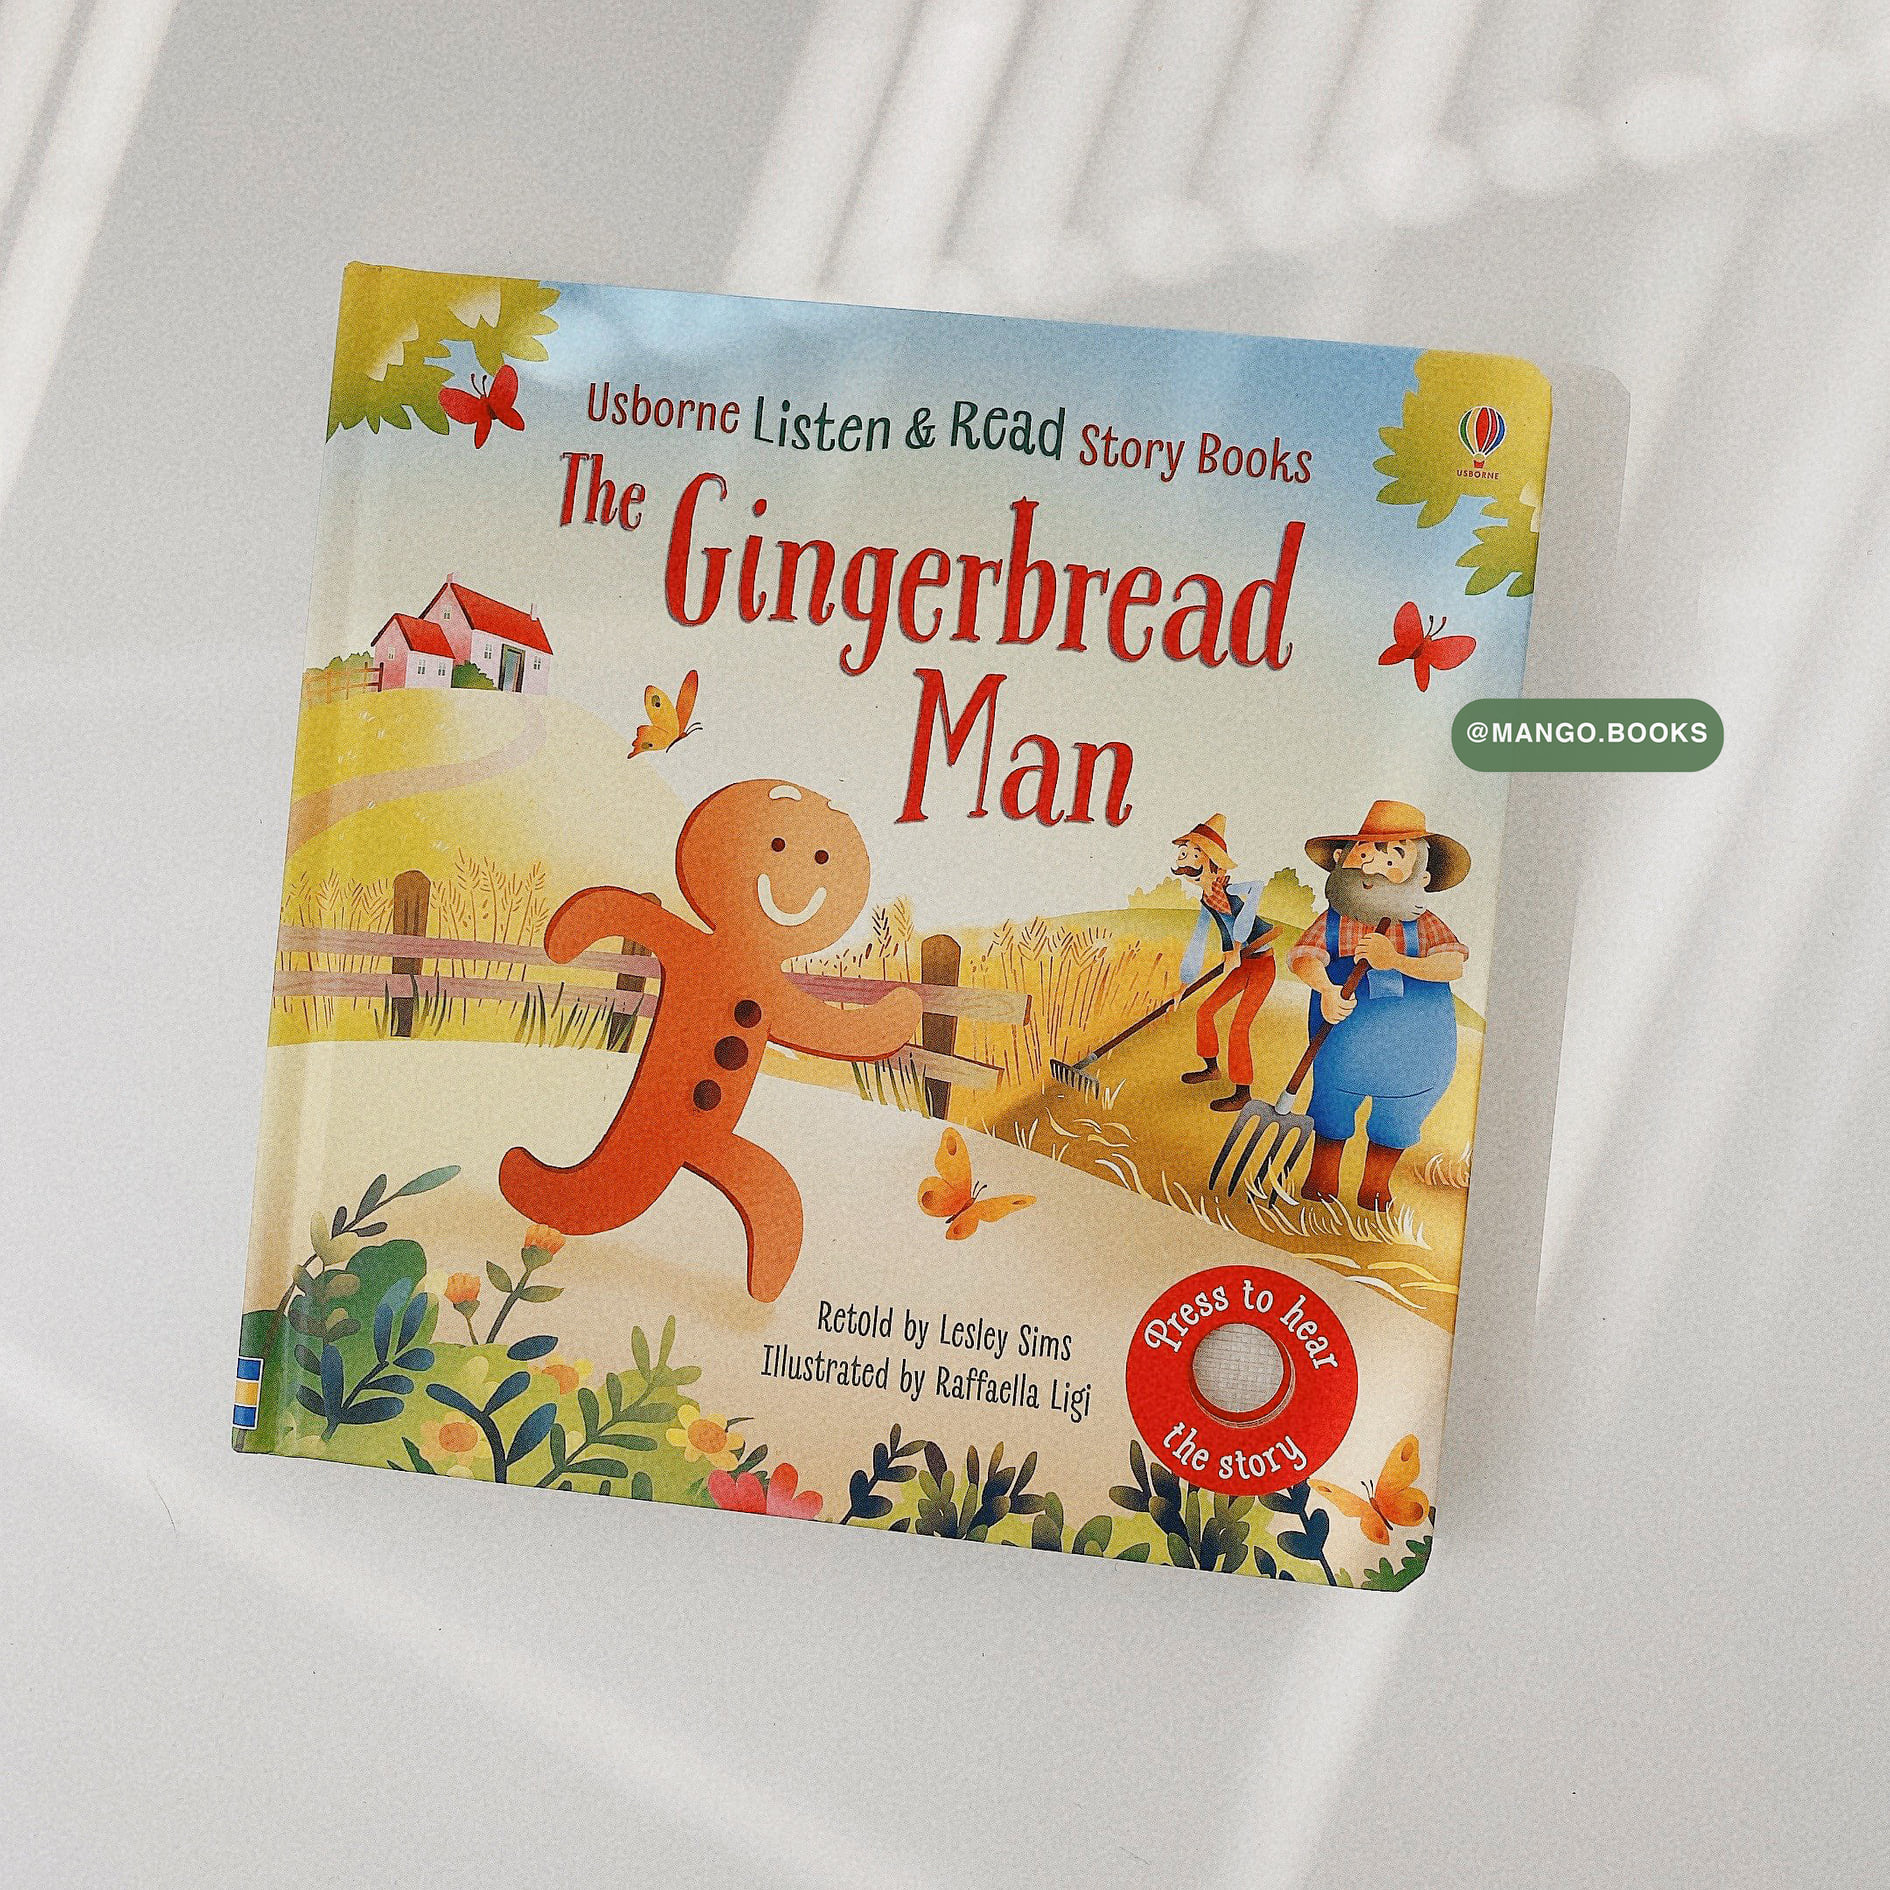 Listend and Read: The Gingerbread Man